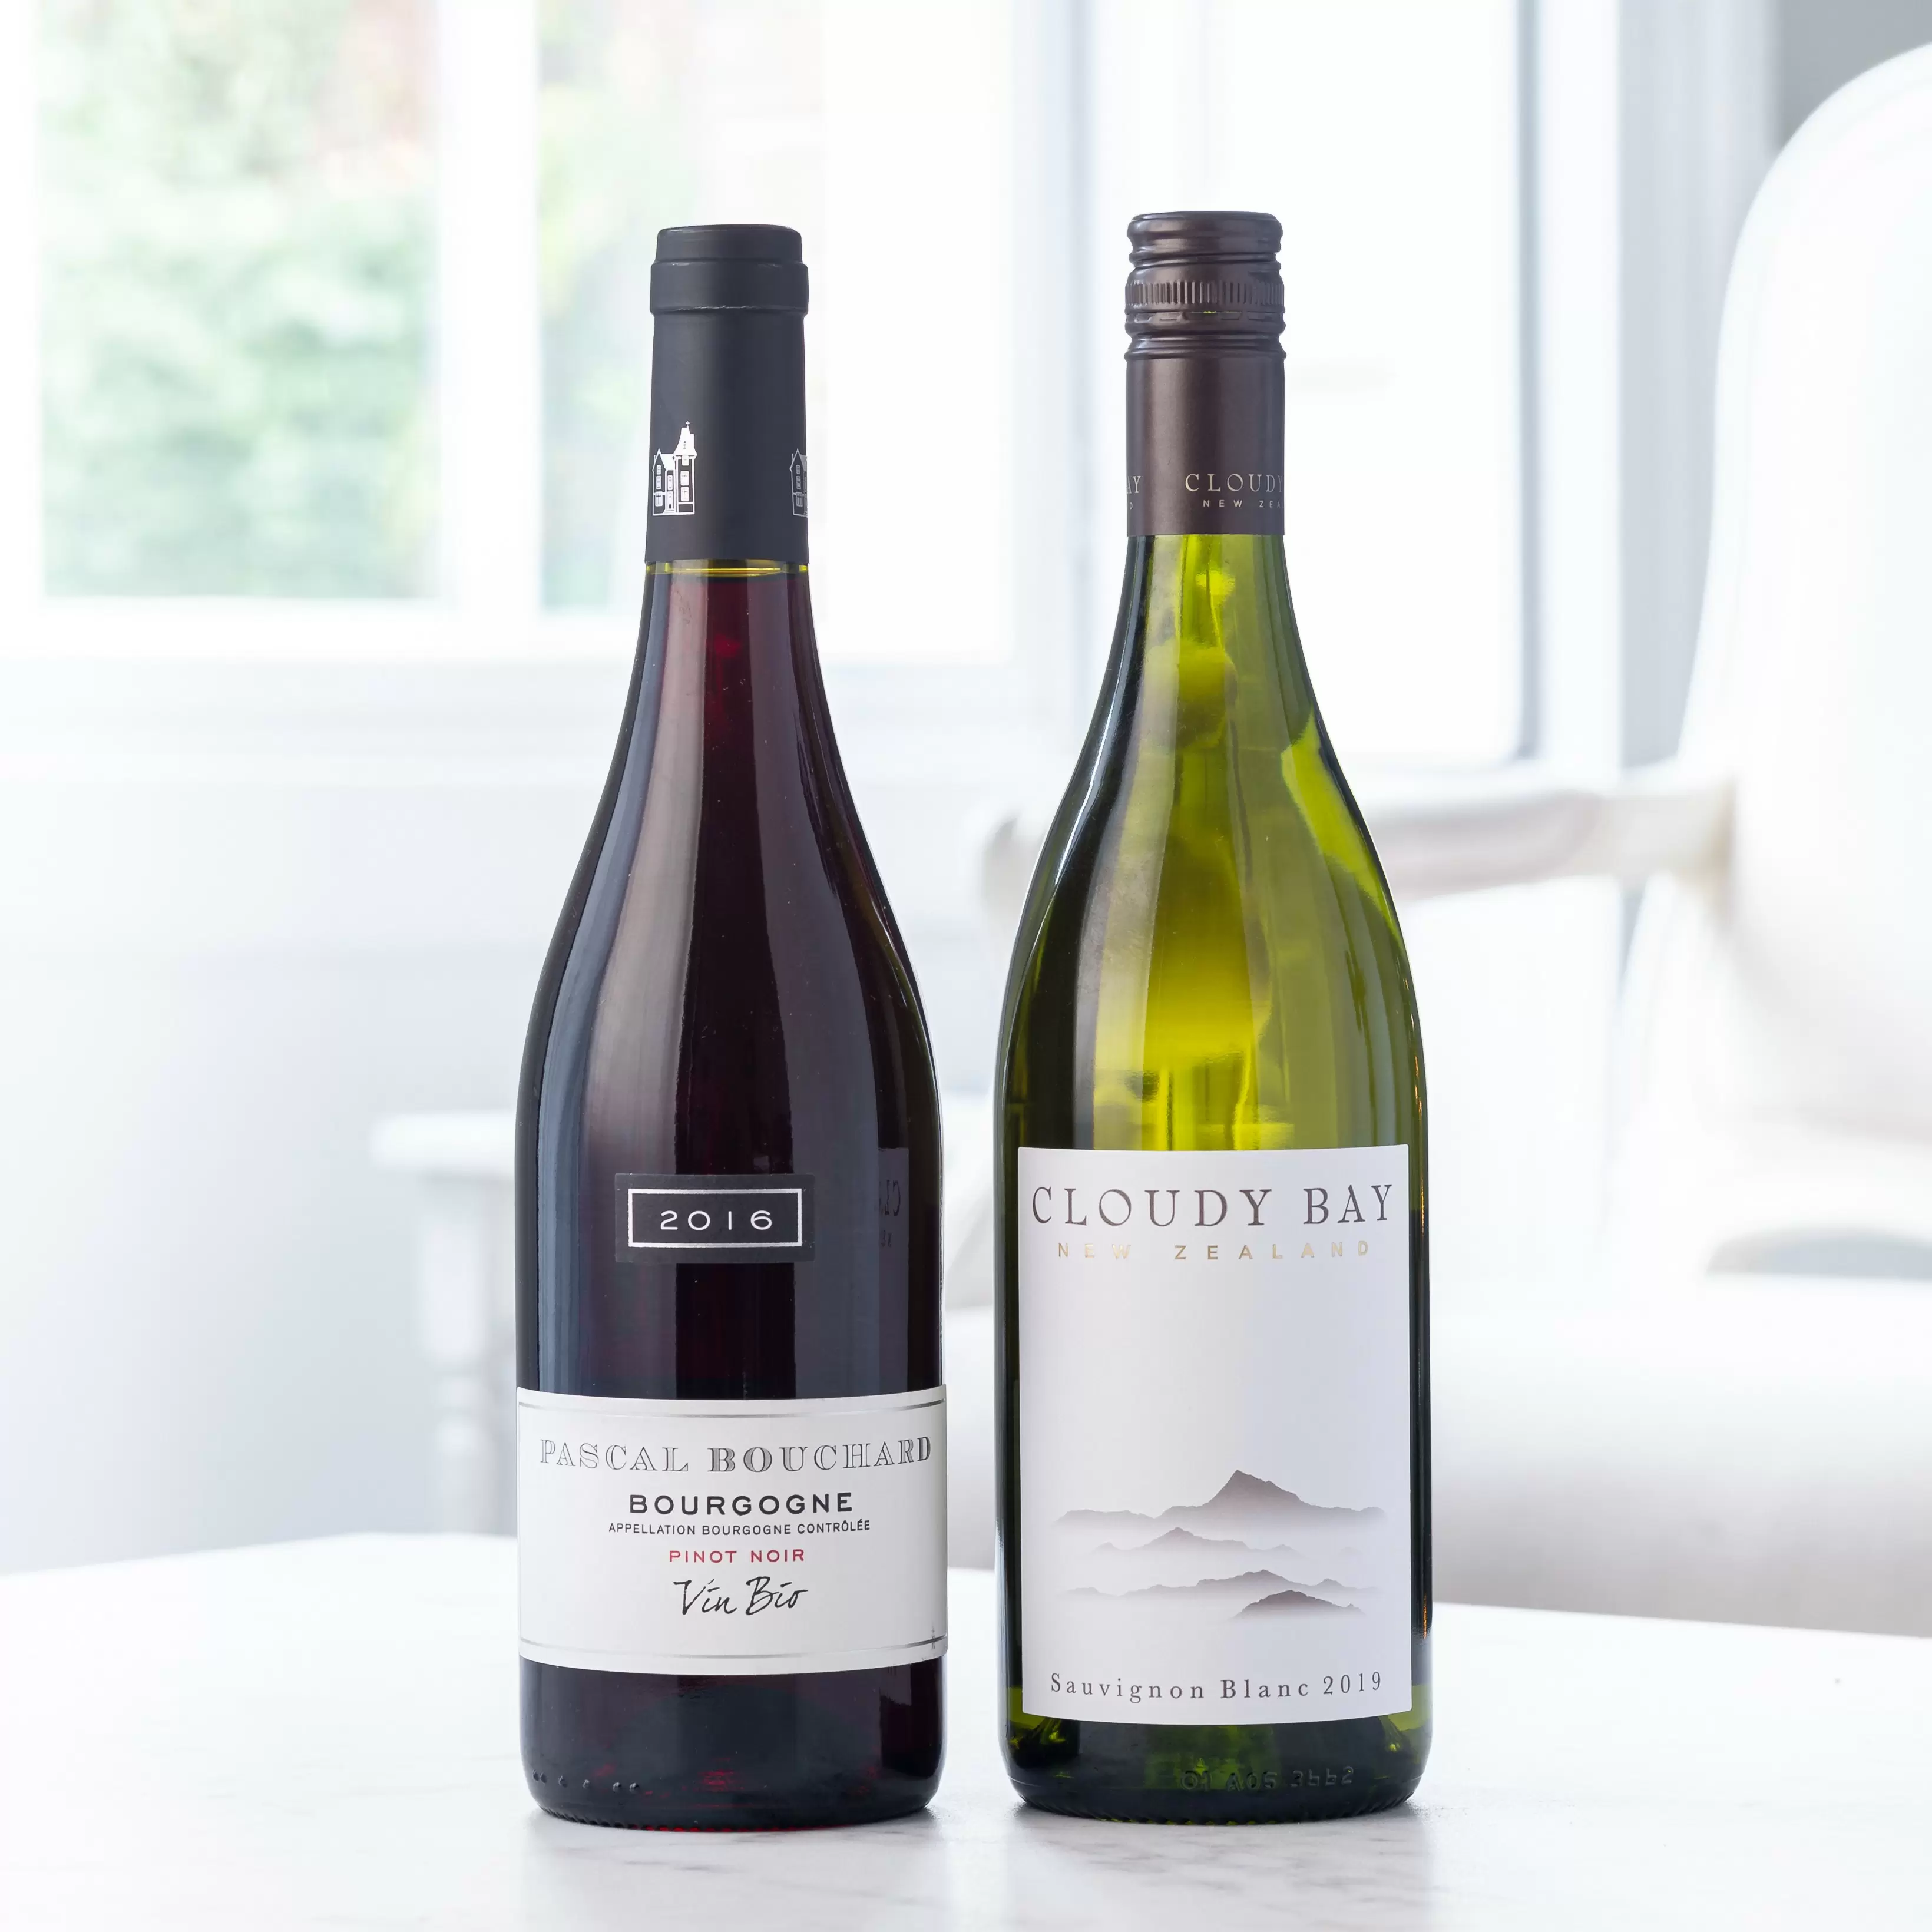 Cloudy Bay and Bourgogne Pinot Noir Duo